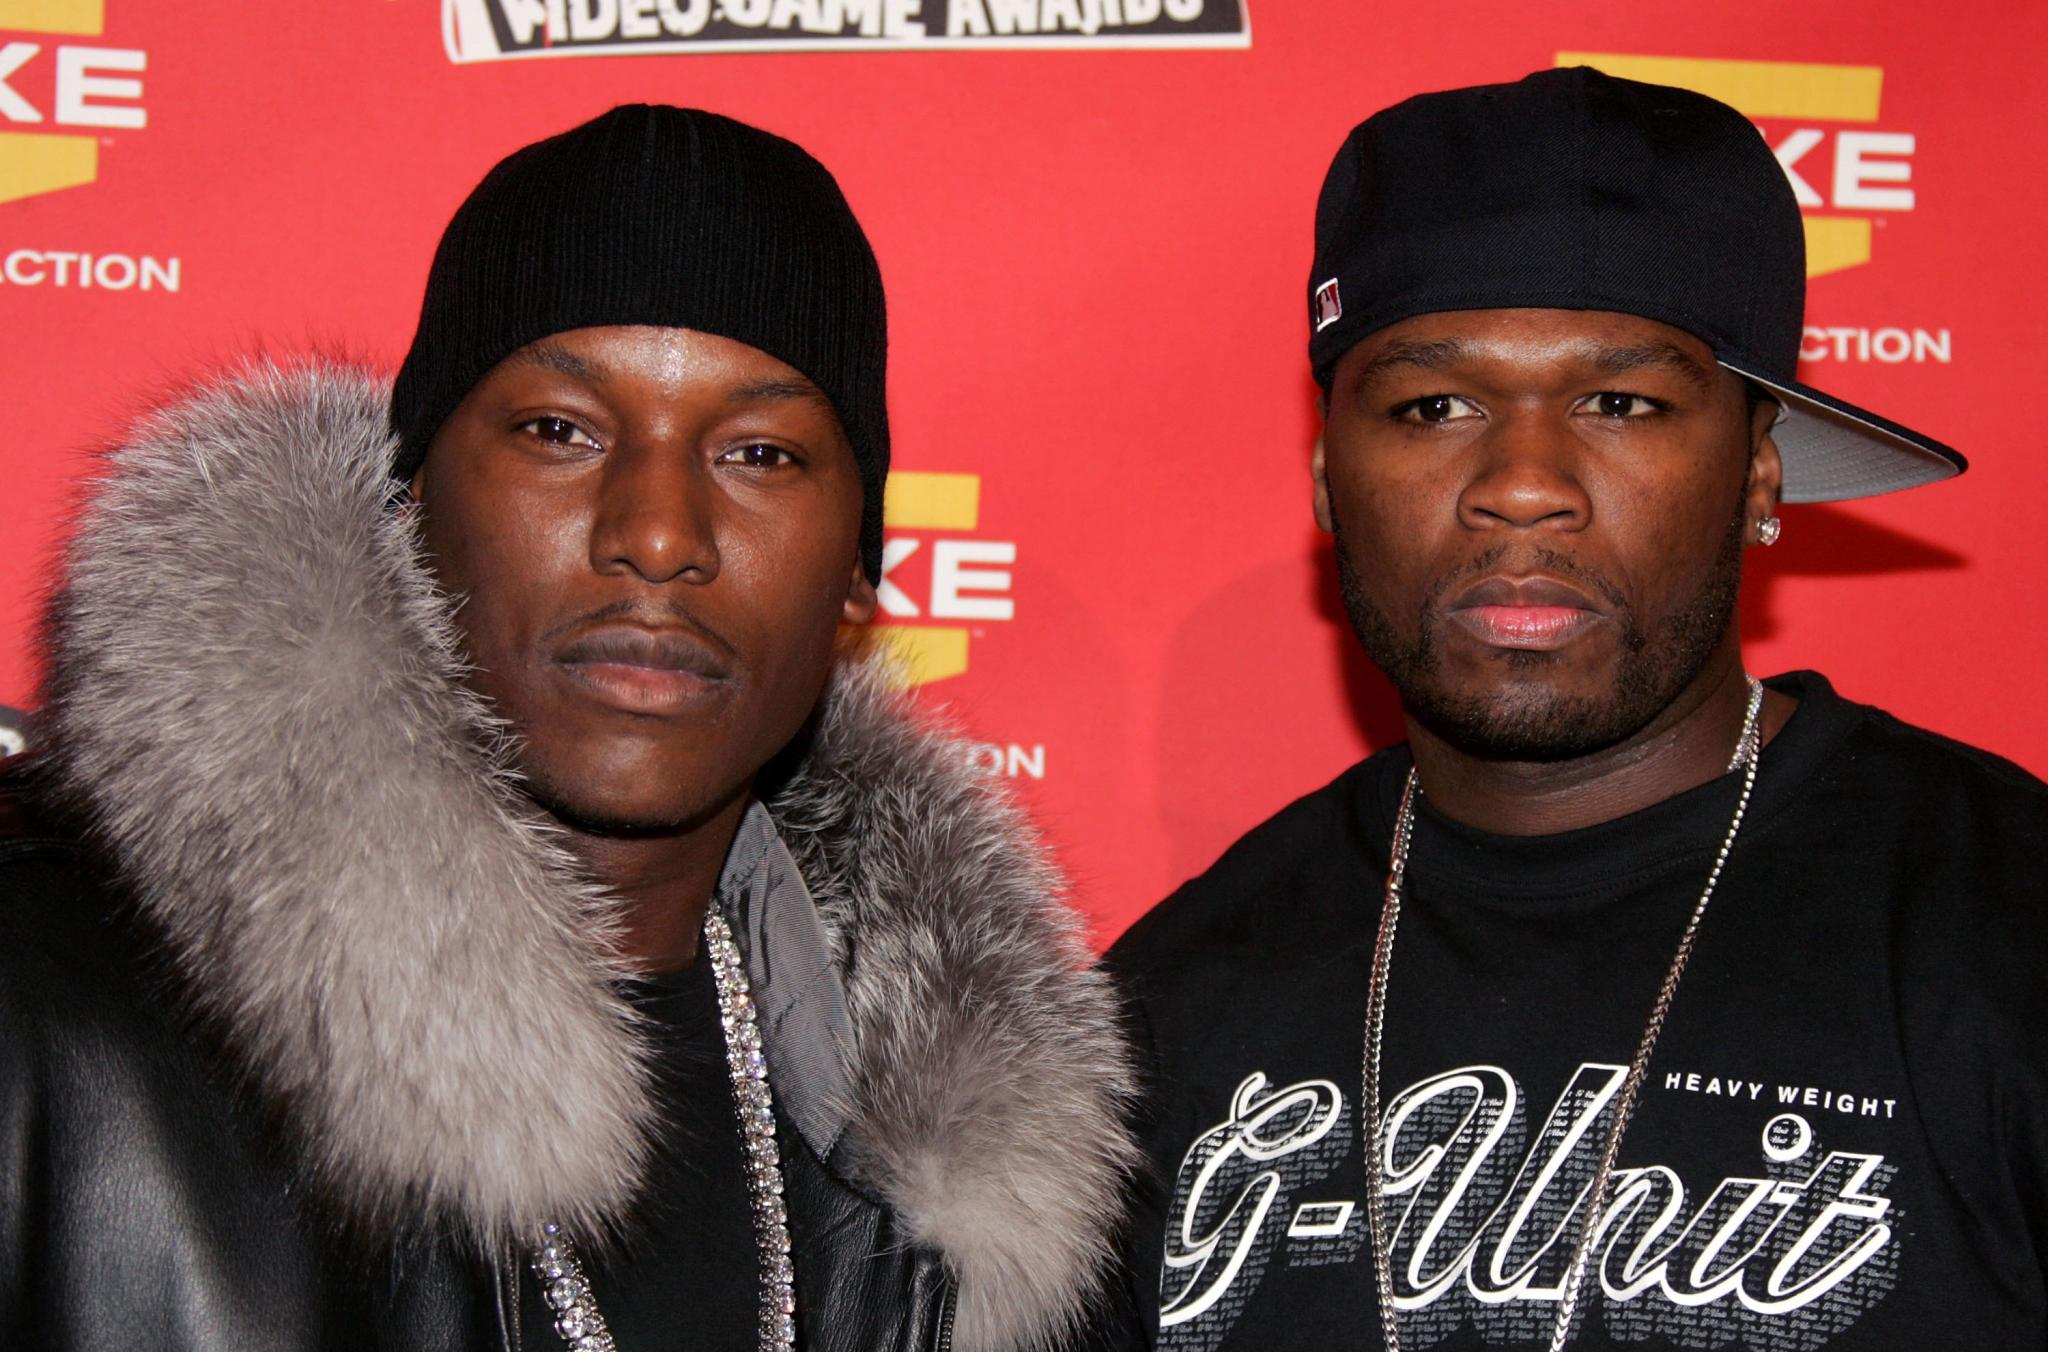 Tyrese, 50 Cent Beg Chris Rock to Step Down as Oscars Host
